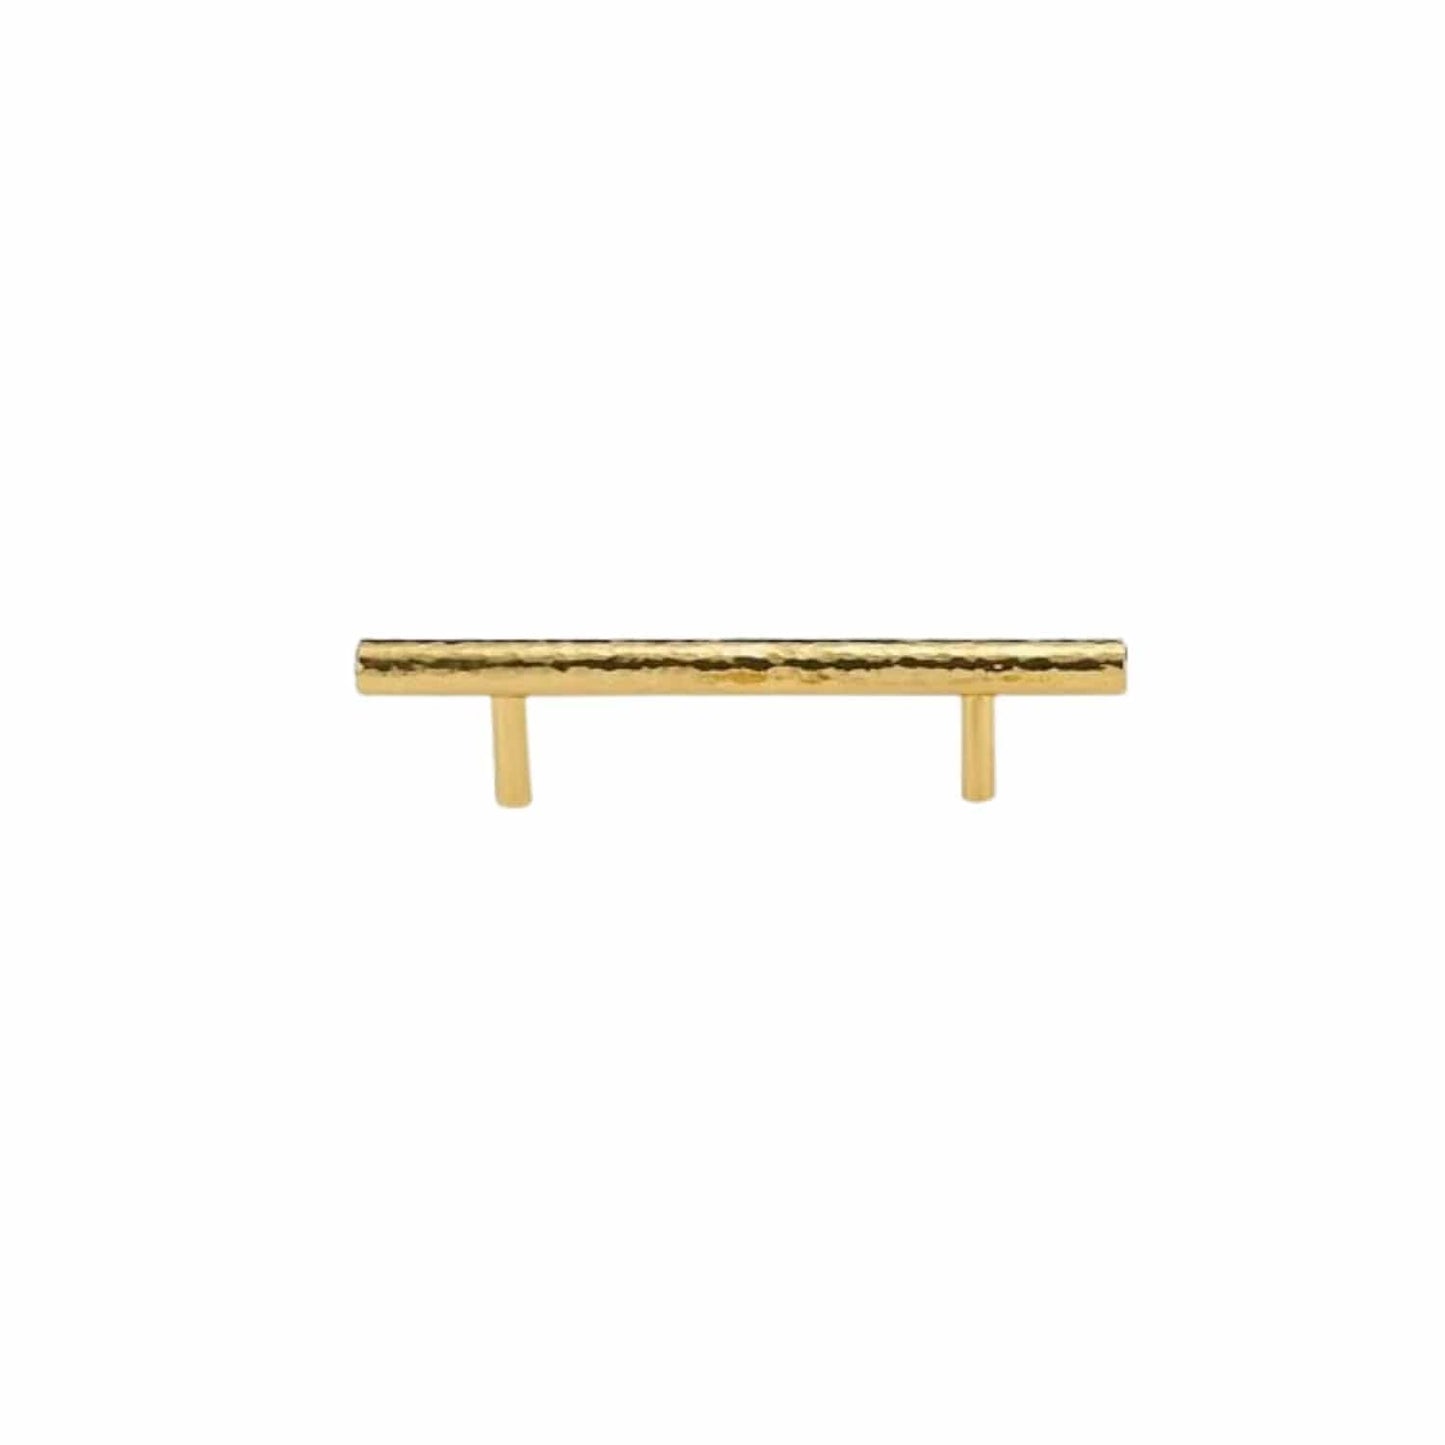 Cabinet Knobs & Handles 156 x 34mm (HS96) / Gold Hammer Finish / Solid Brass Bayside Luxe - Hobart Hammer Finish Handles